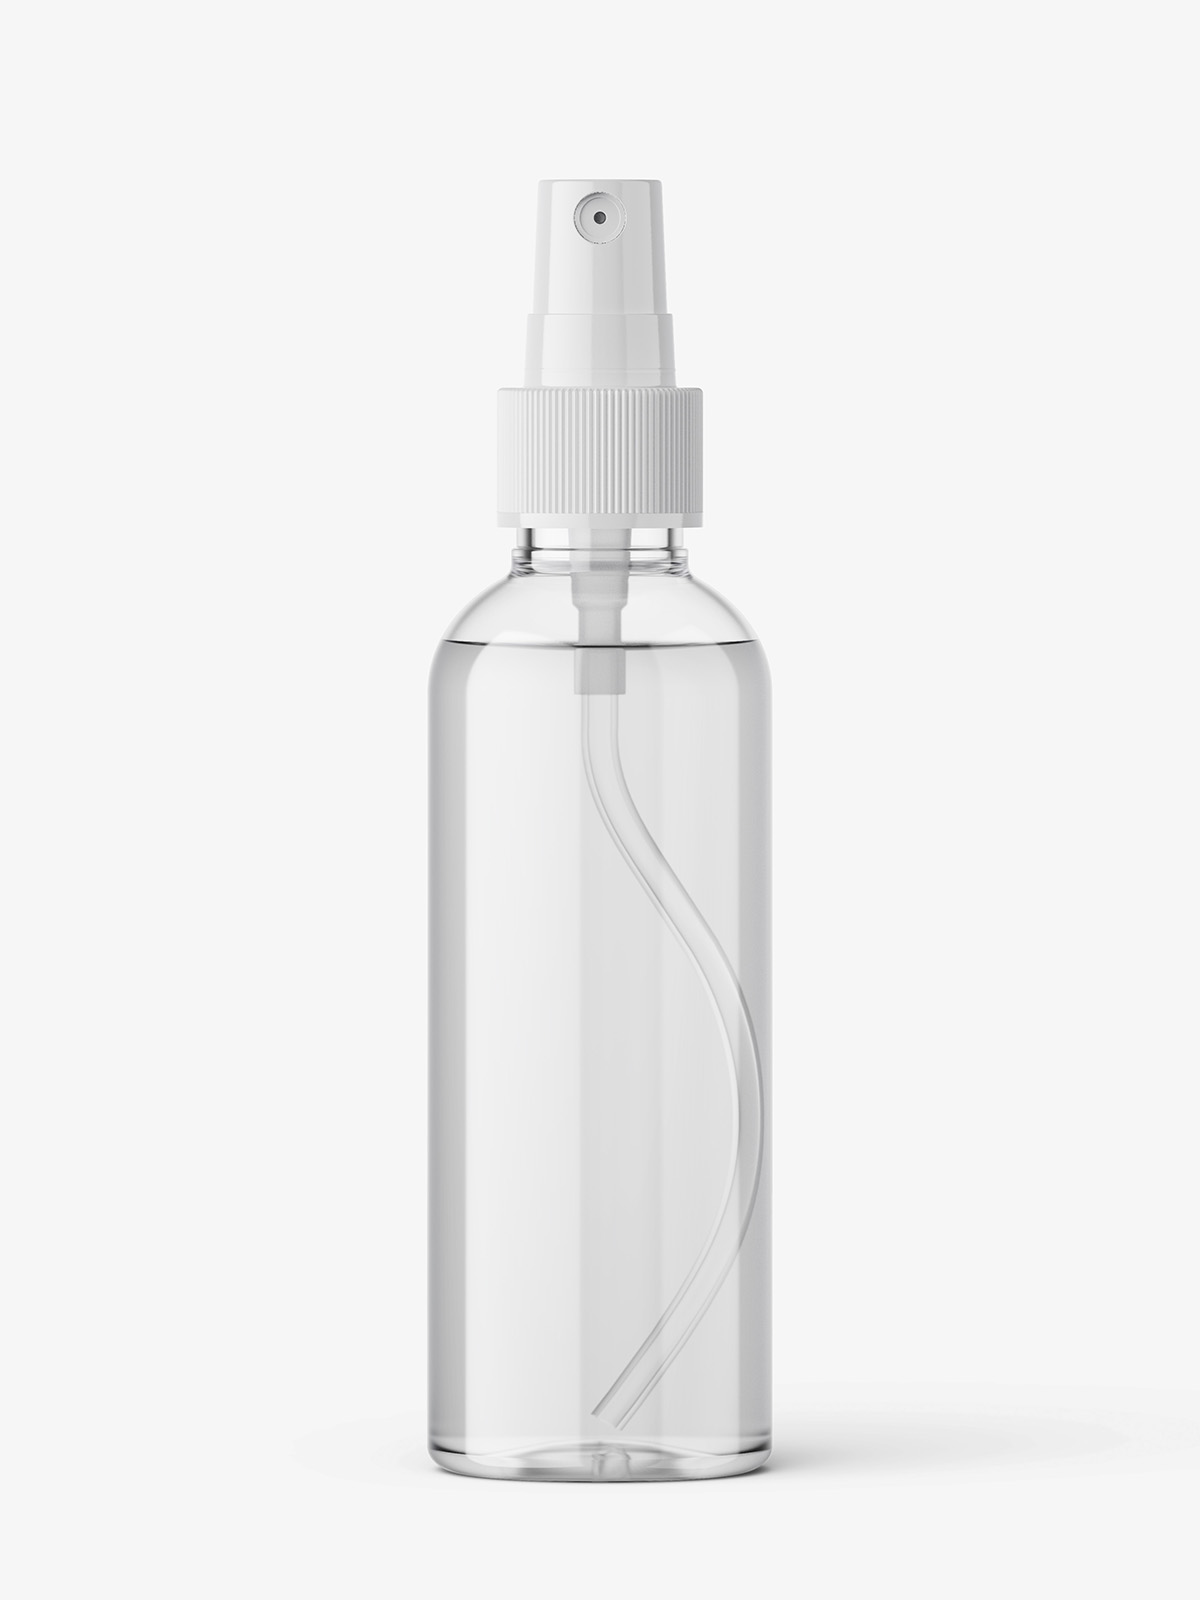 Download Clear Bottle Mockup Download Free And Premium Psd Mockup Templates And Design Assets